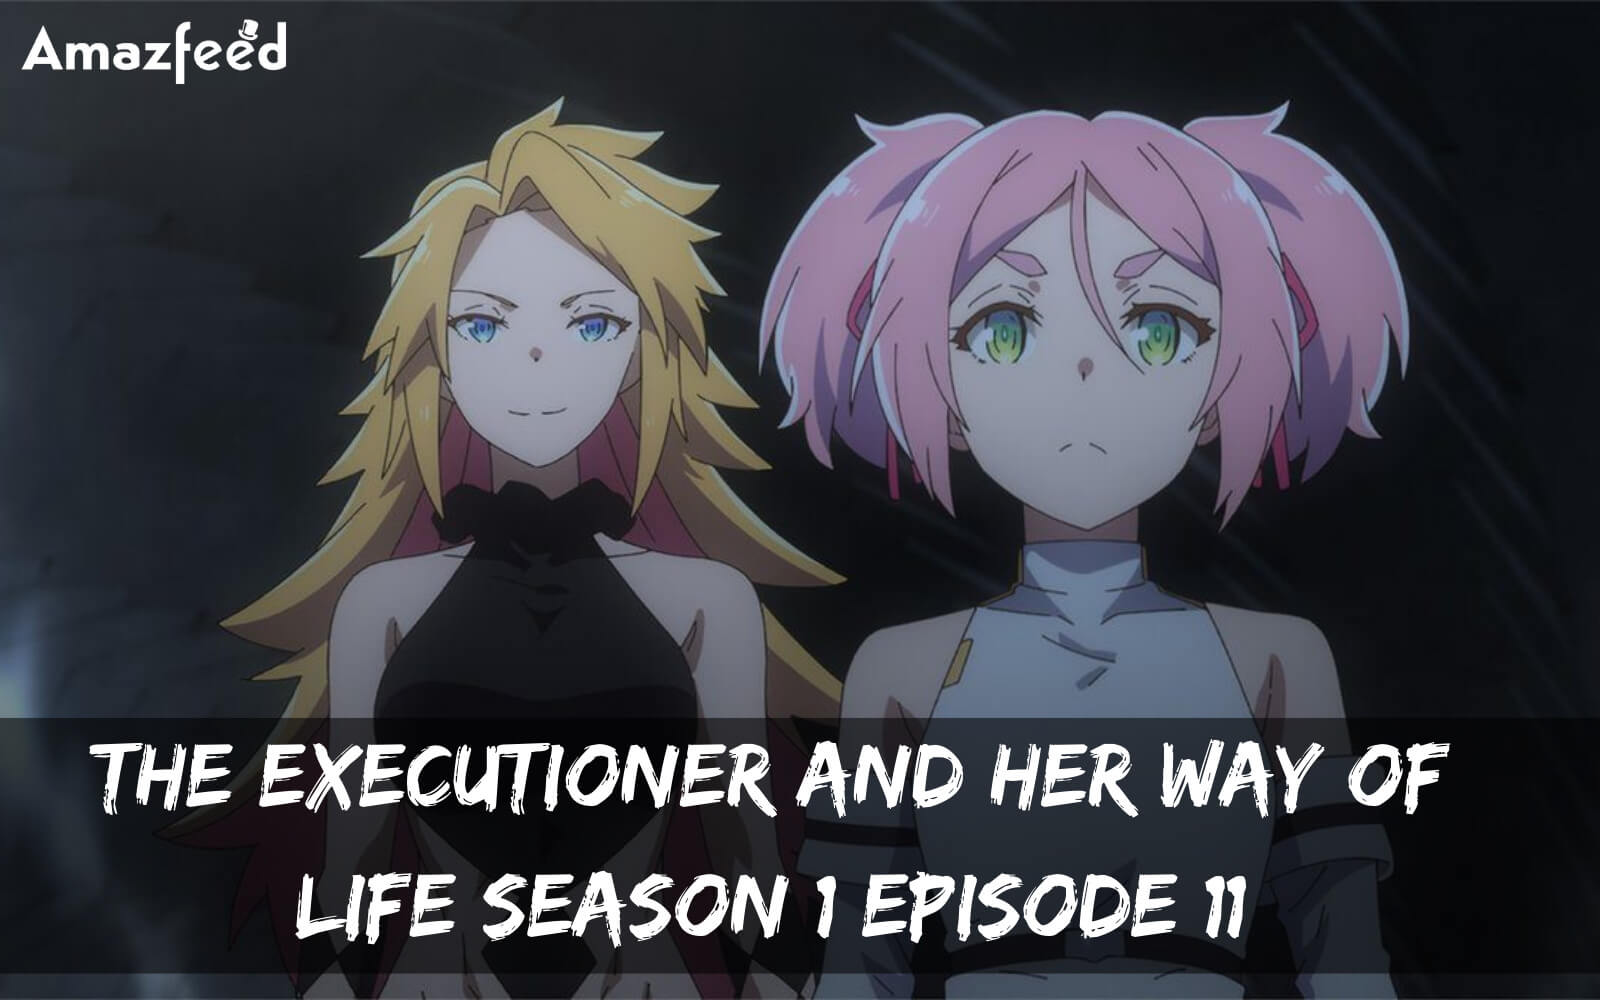 The Executioner and Her Way of Life Season 1 Episode 11 release date